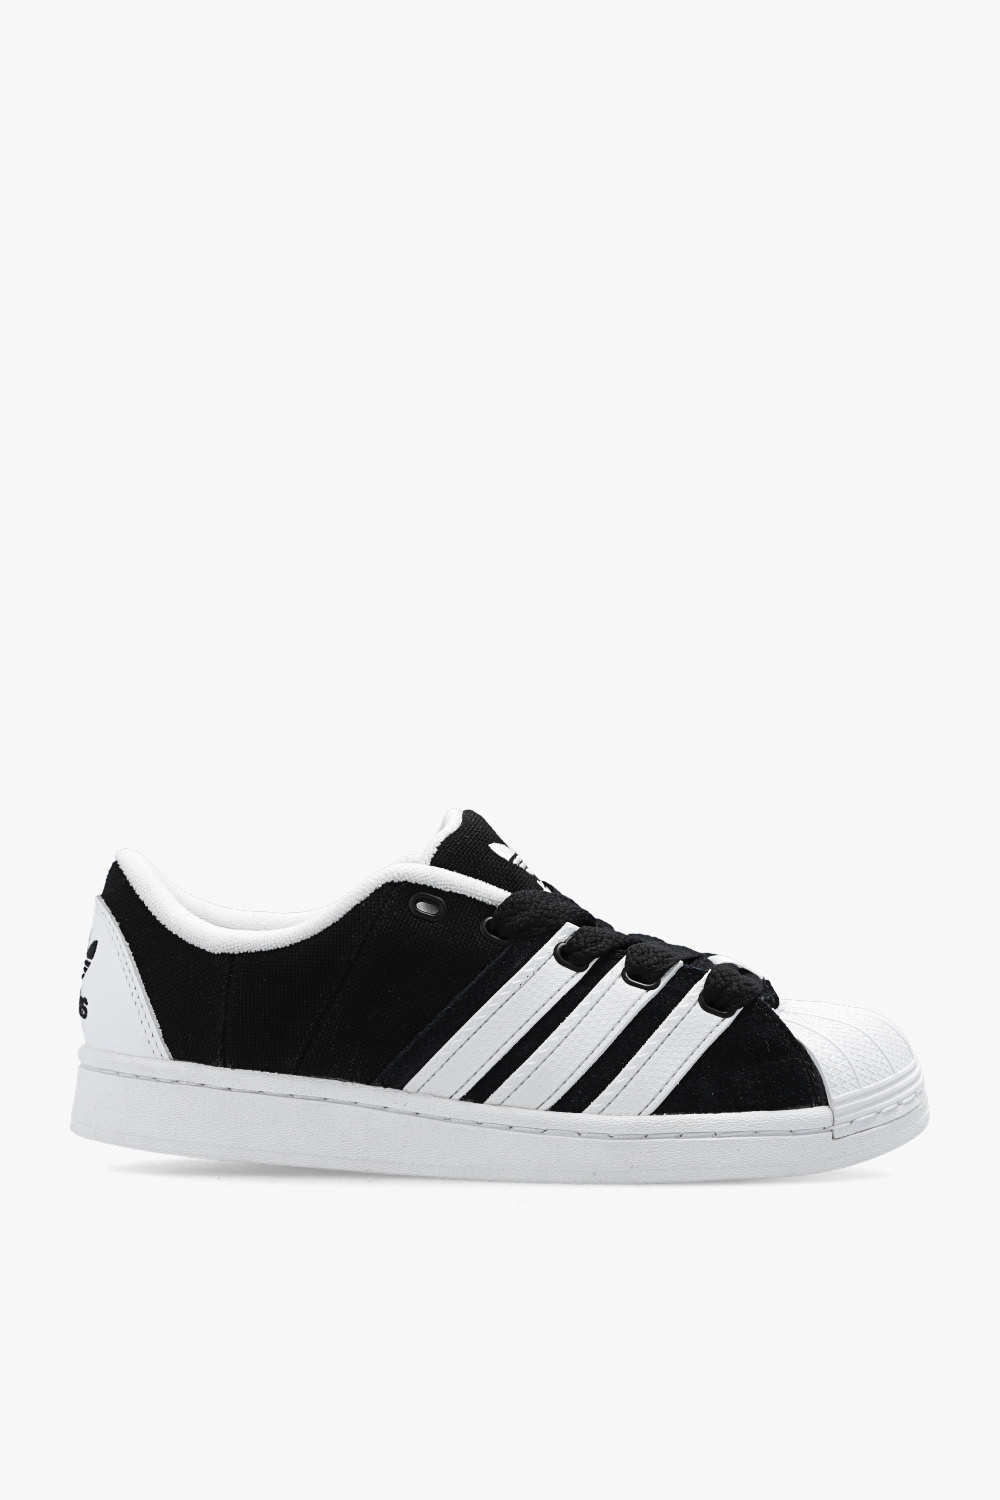 ADIDAS sneakers Originals poster info ideas Shoes dress | for Men\'s | girls | \'SUPERSTAR adults SUPERMODIFIED\' StclaircomoShops adidas